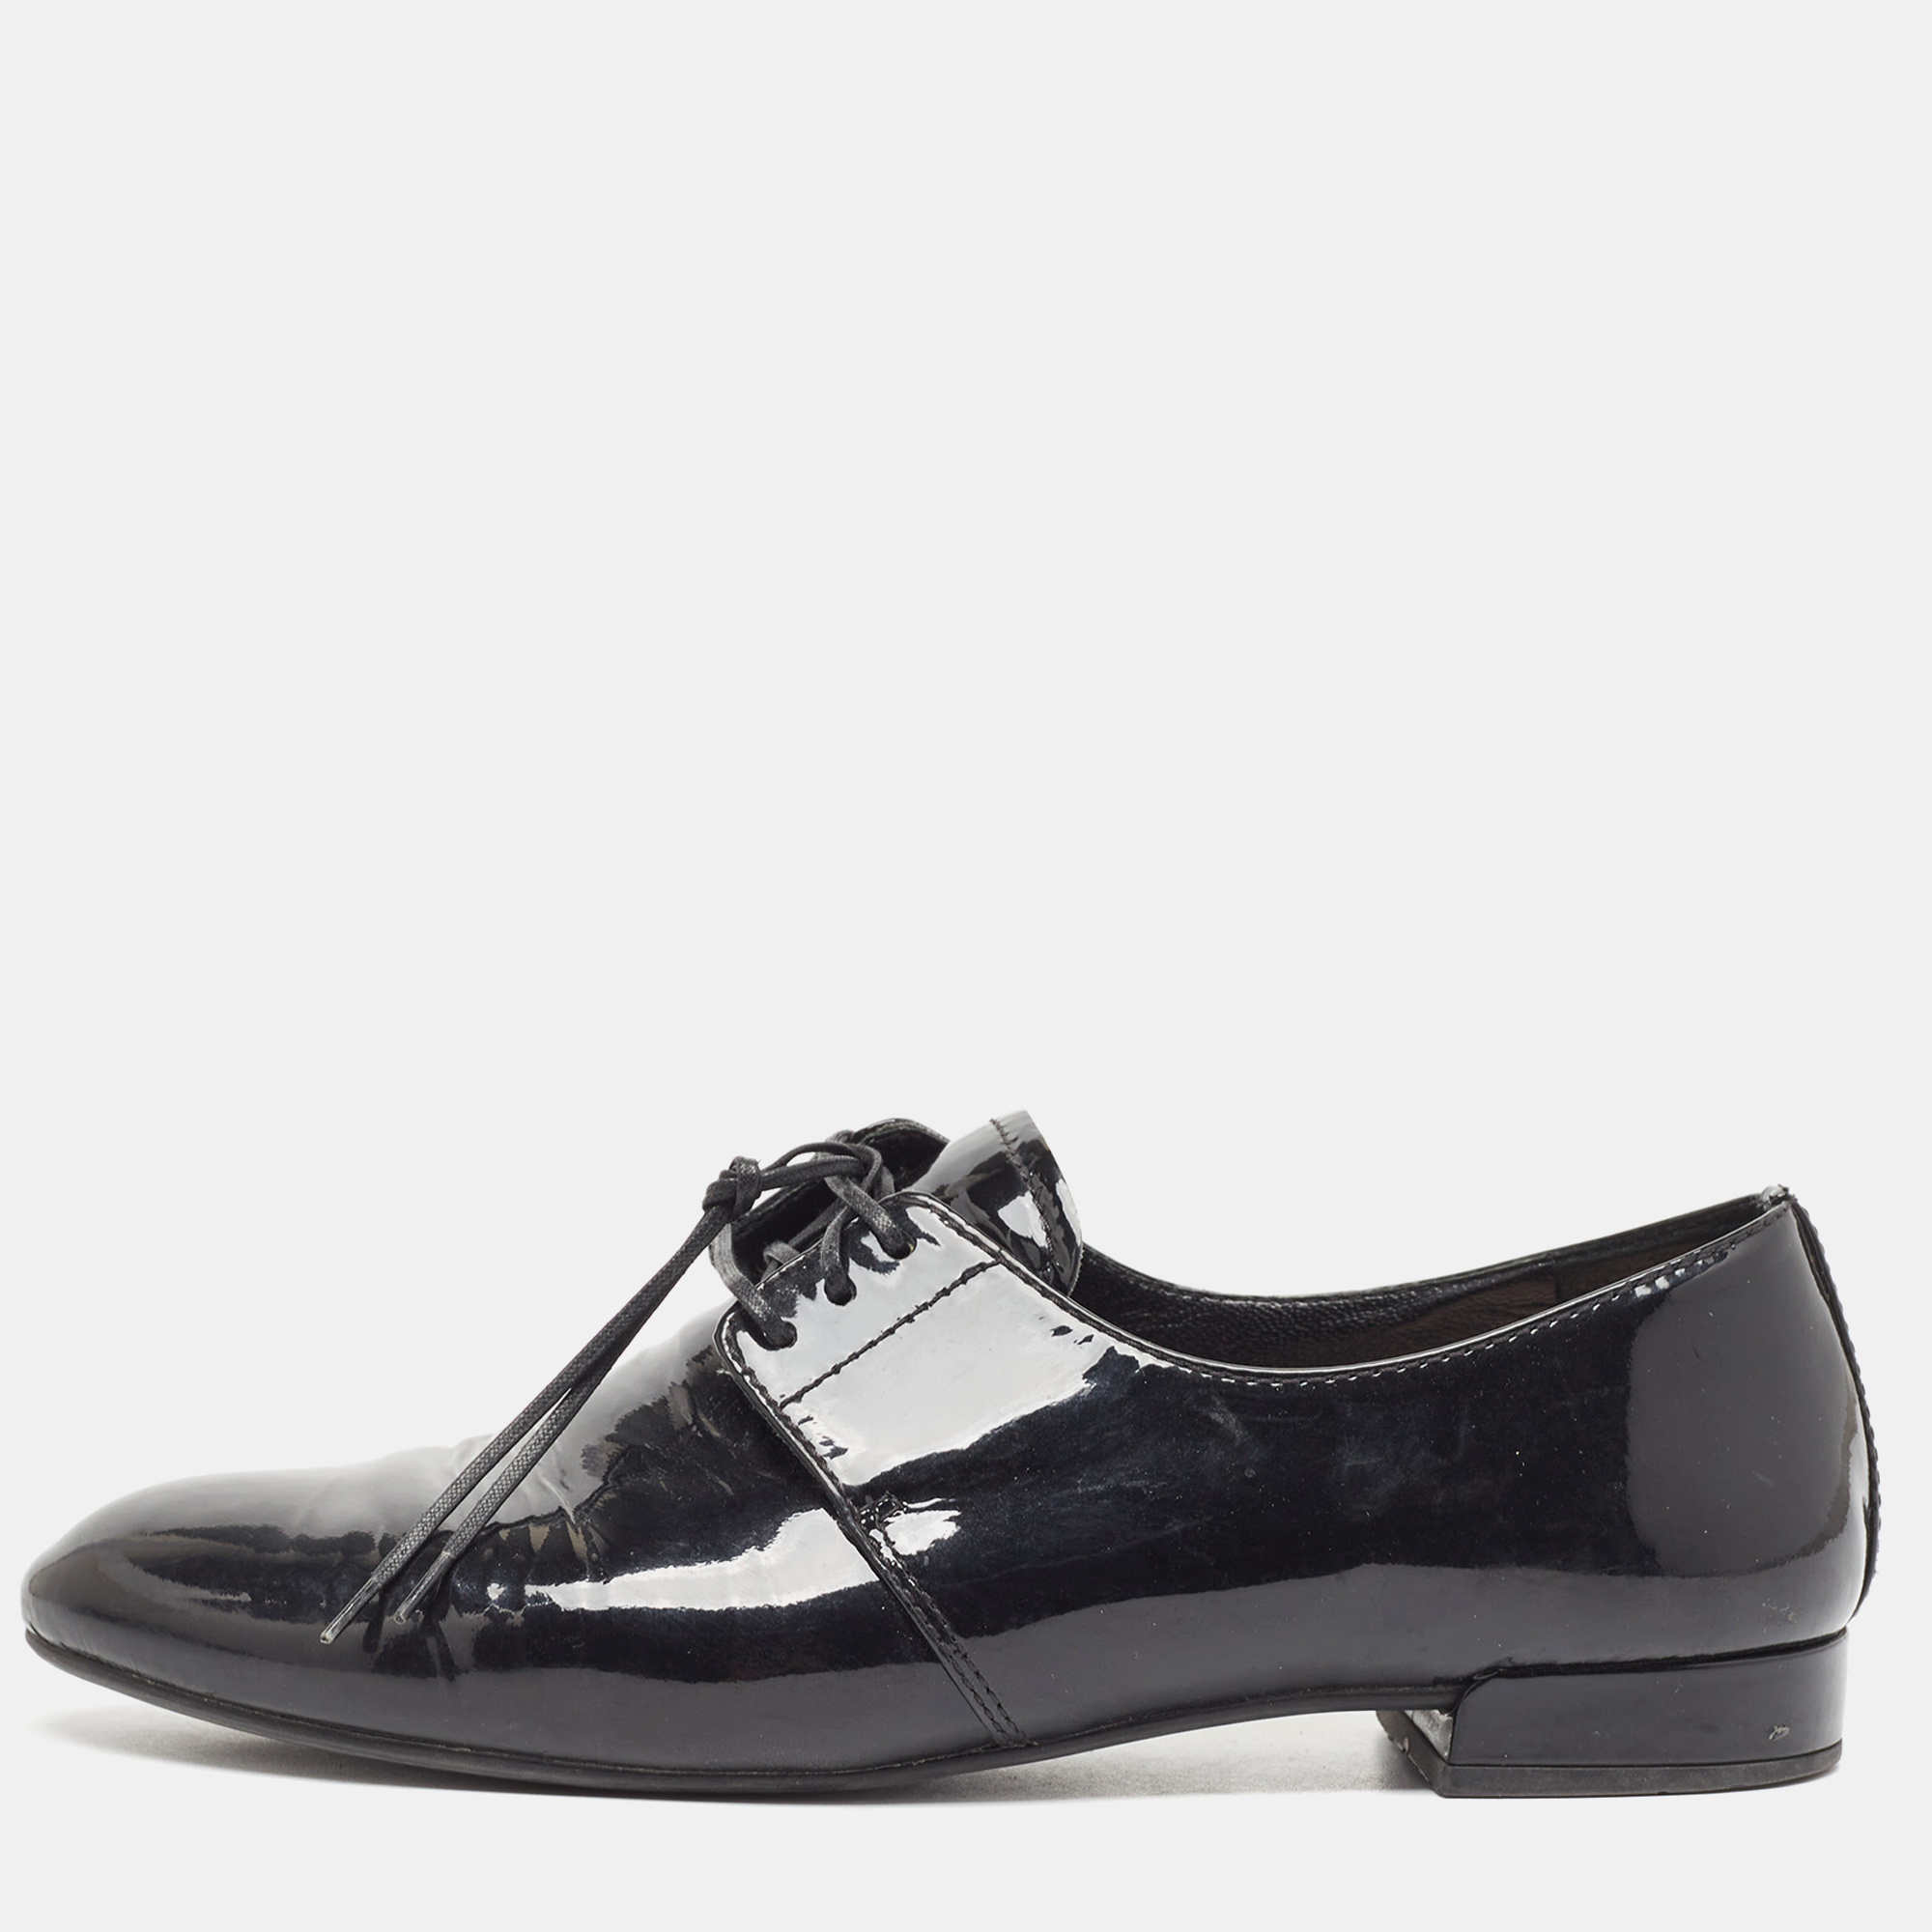 Pre-owned Prada Black Patent Leather Lace Up Derby Size 36.5